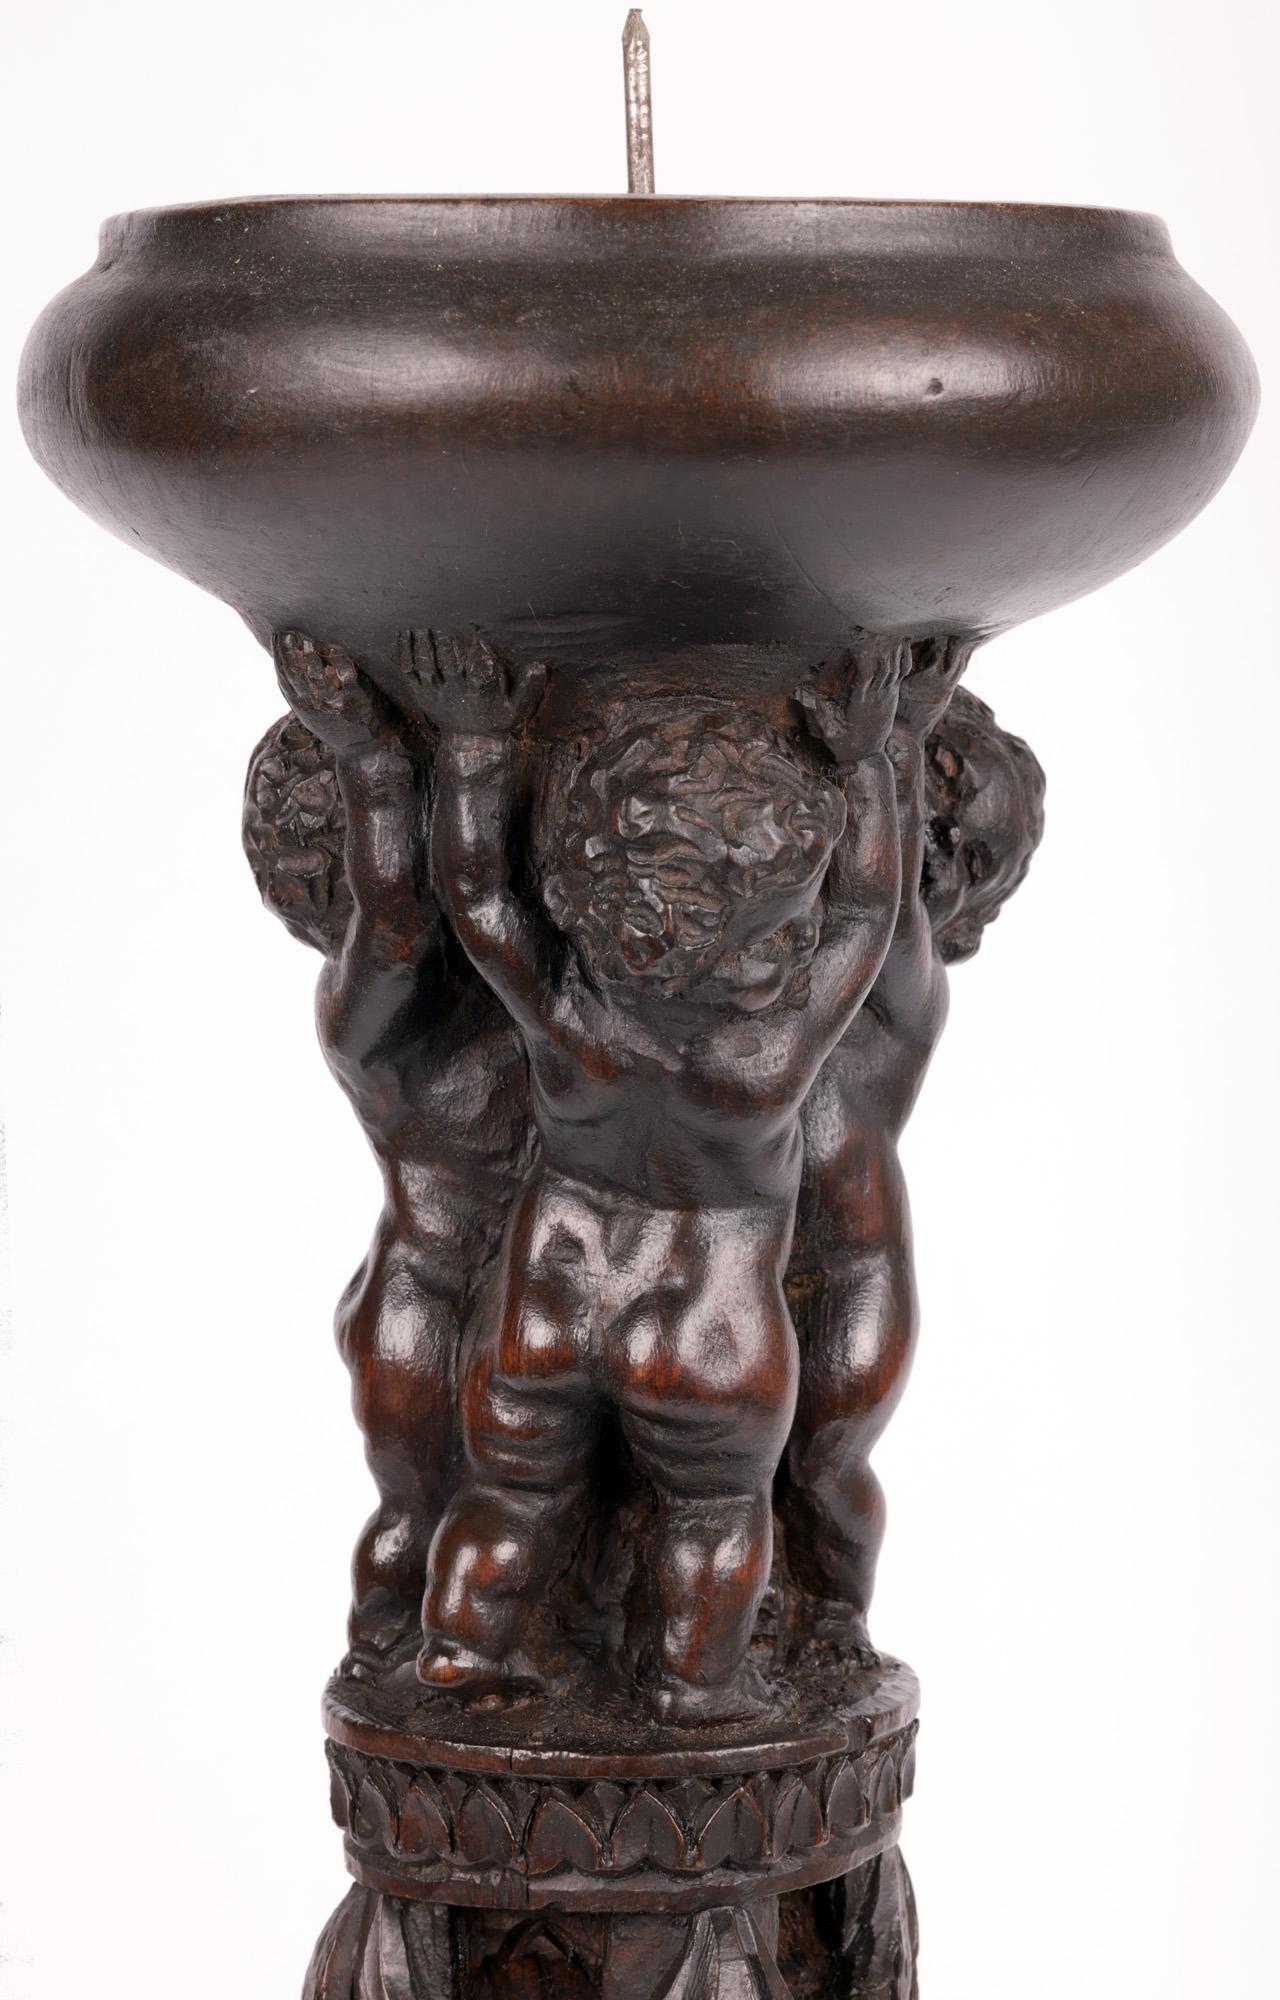 A beautifully carved antique Flemish wooden pricket candlestick with putti dating from the late 16th or early 17th century. The floor standing candlestick has a round bowl shaped top with the central spike candle holder, the top supported by three